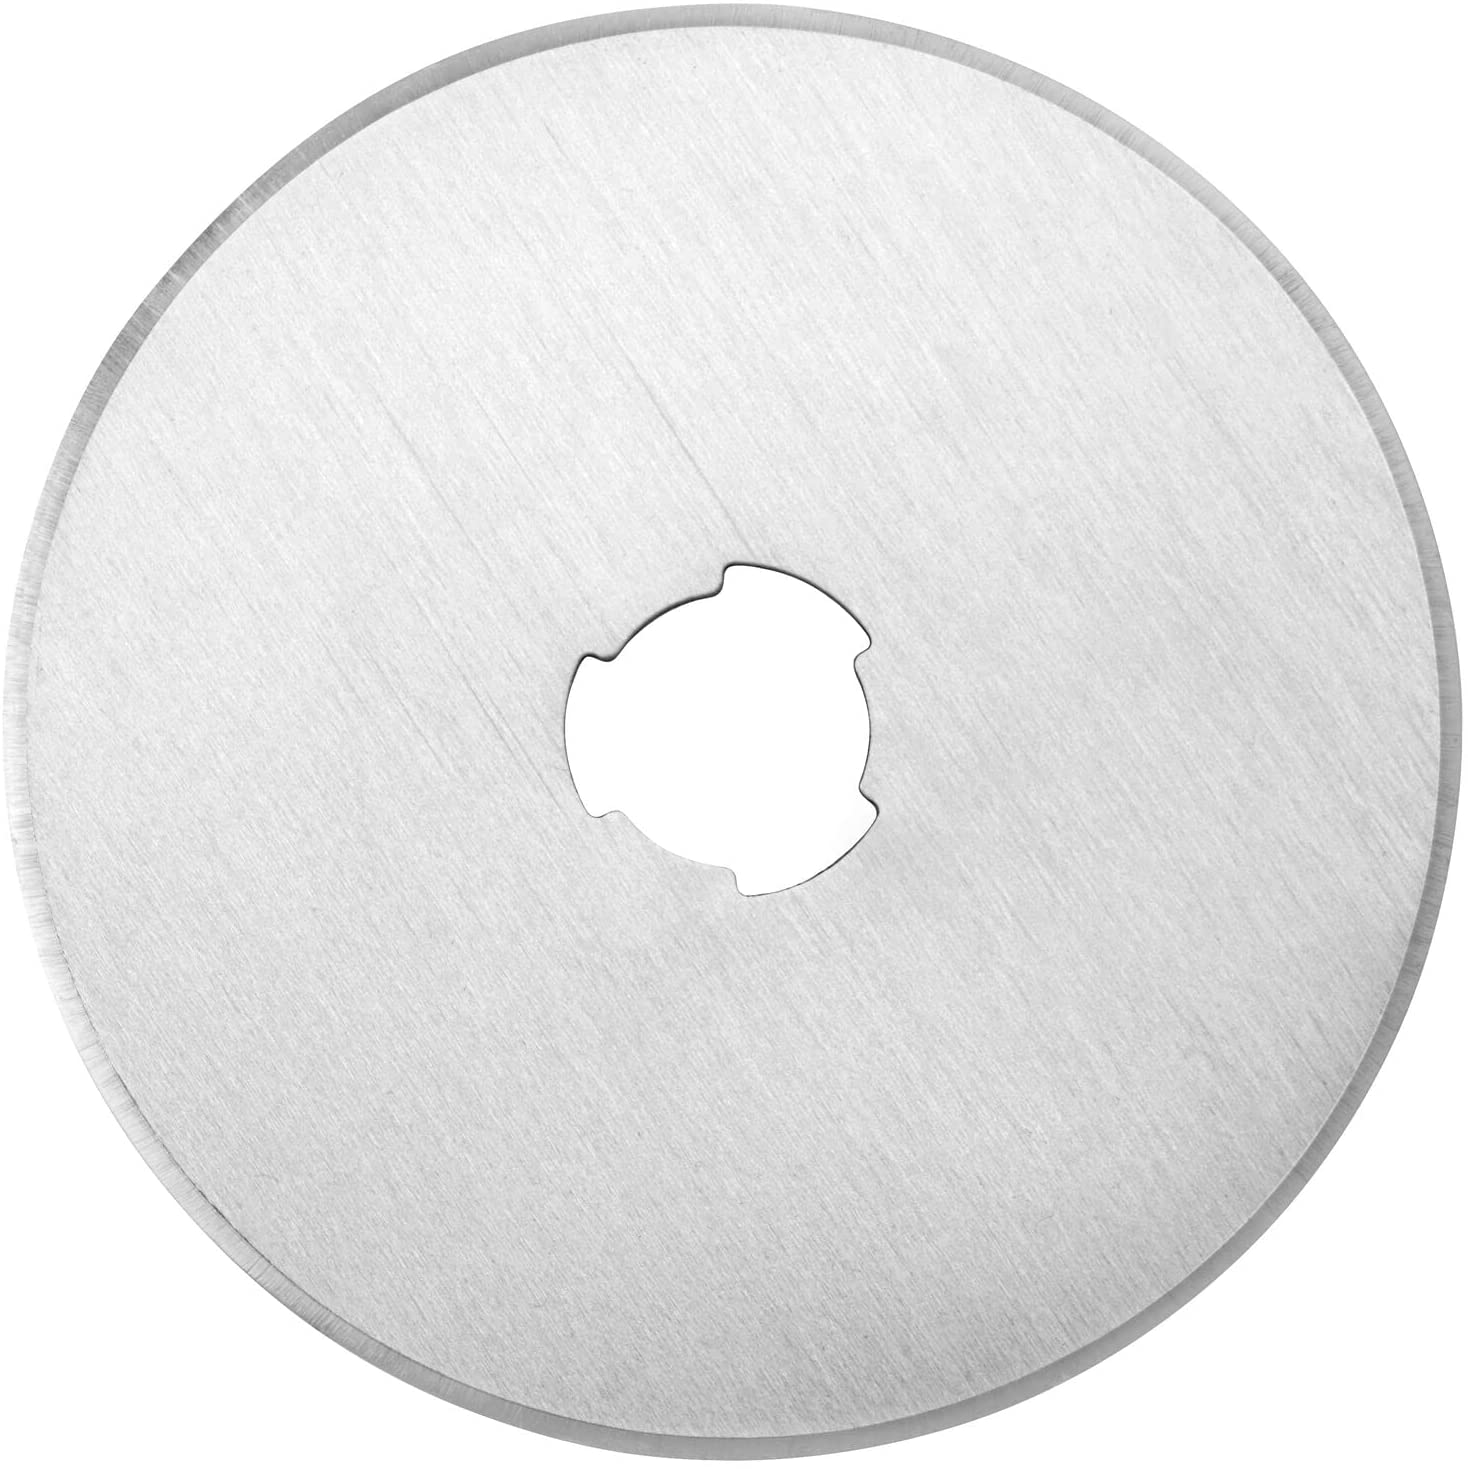 Stanley stht0-11942 Replacement Blade for Rotary Cutter 45 mm